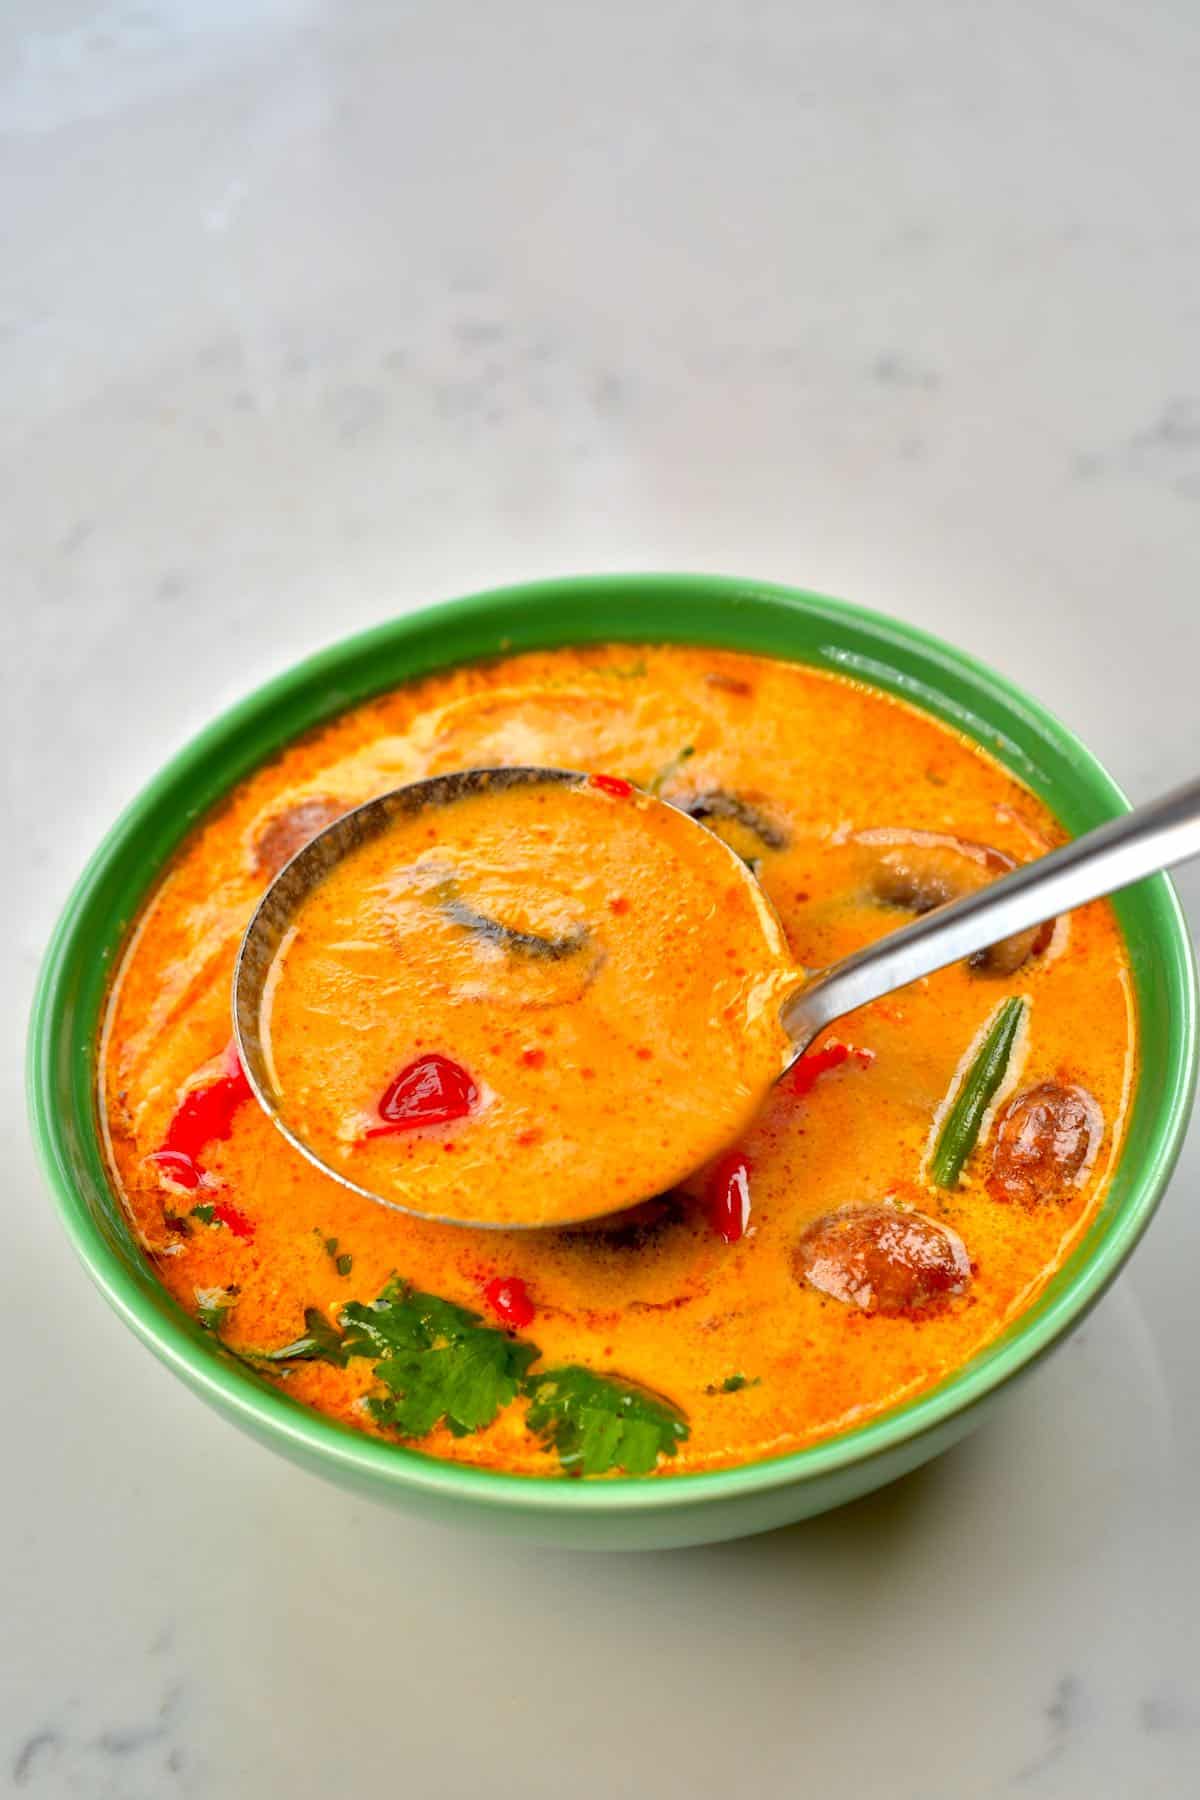 A ladle with tom yum soup filling up a green bowl